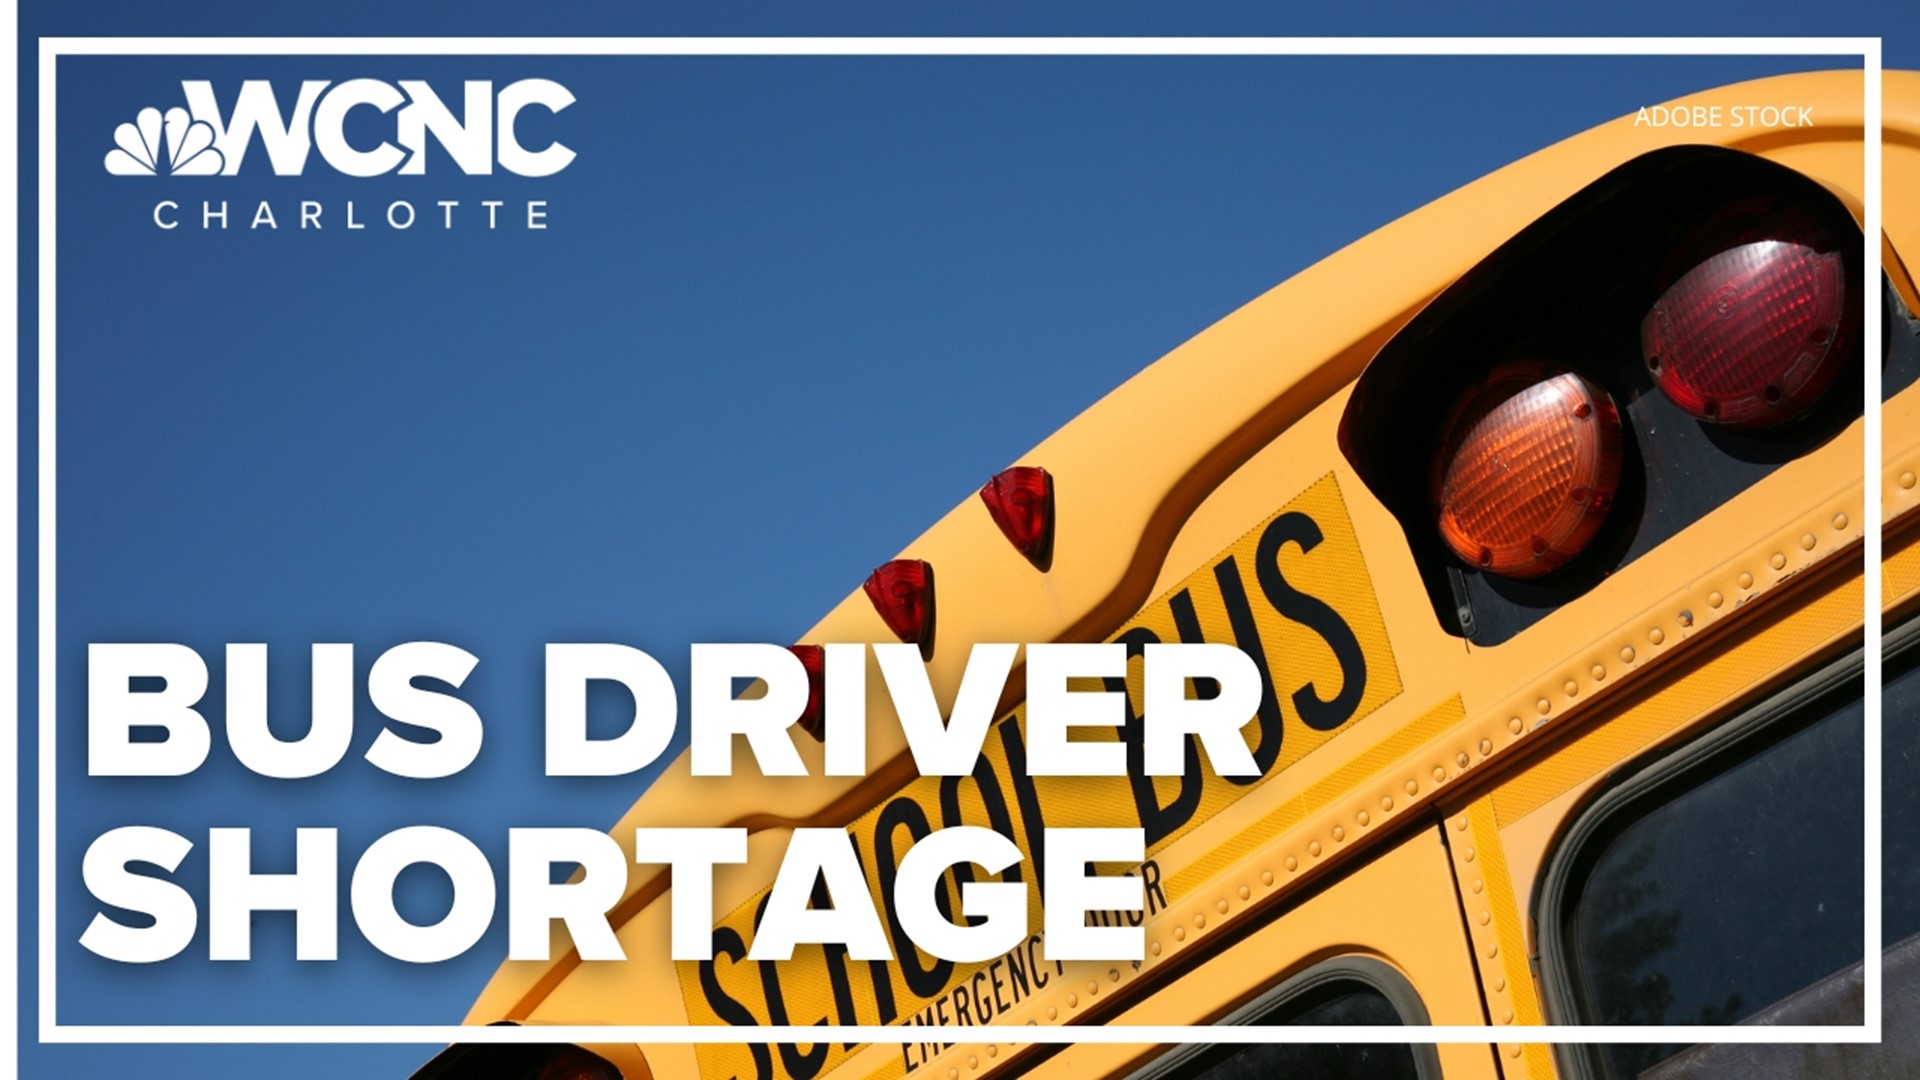 South Carolina's bus driver shortage is creating challenges.